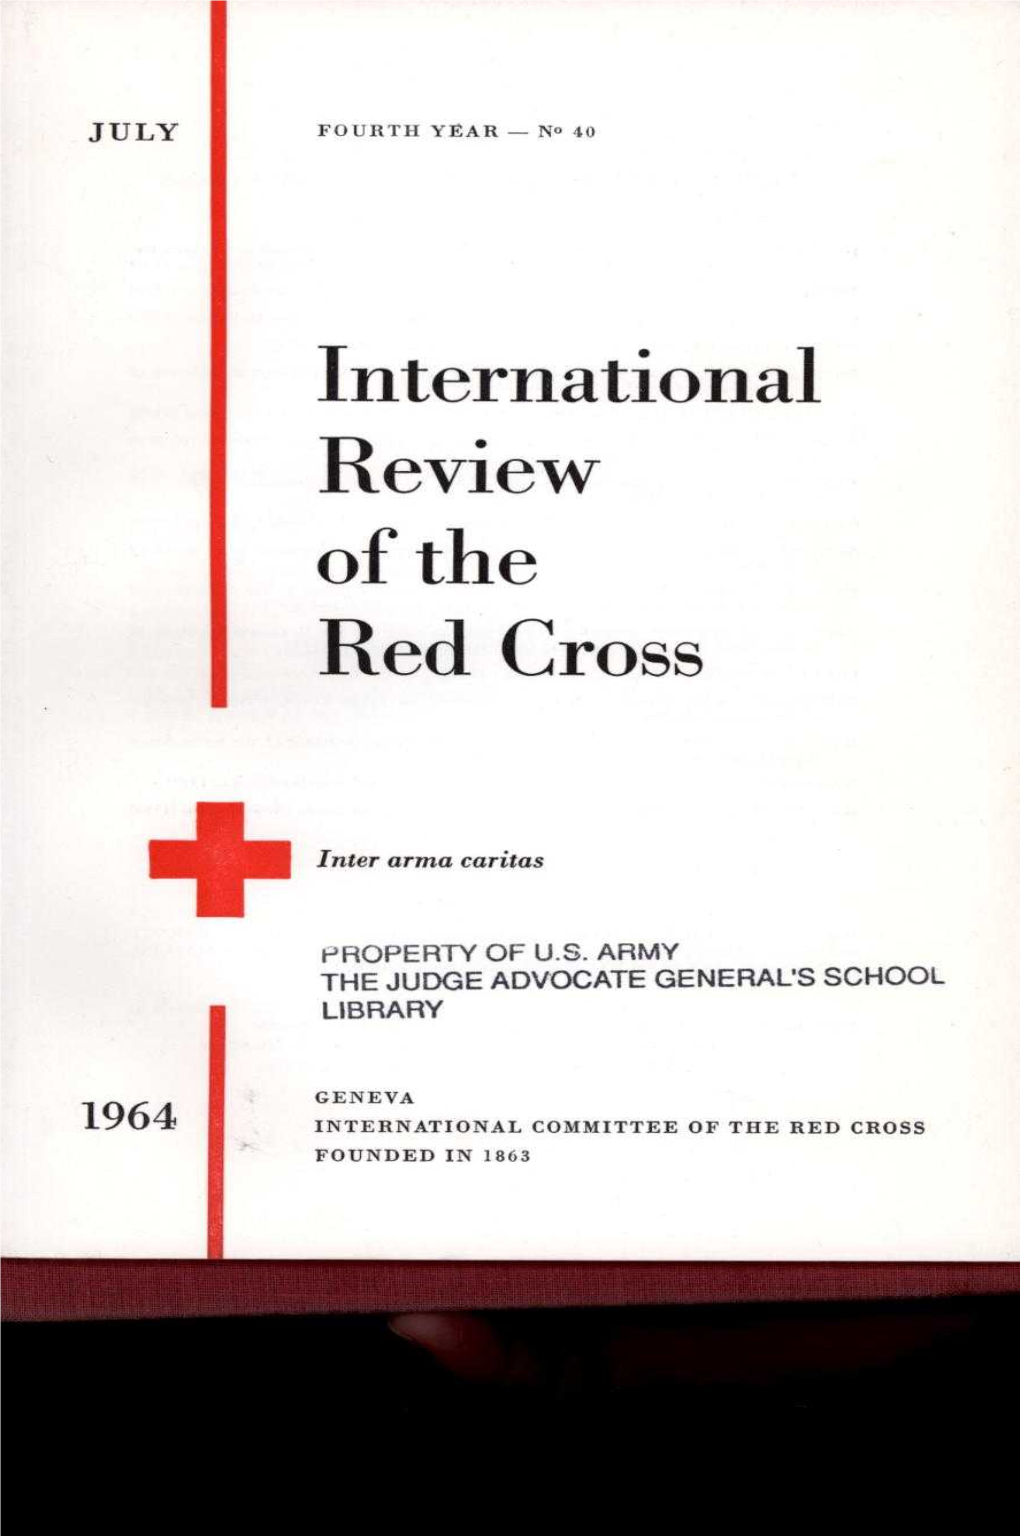 International Review of the Red Cross, July 1964, Fourth Year